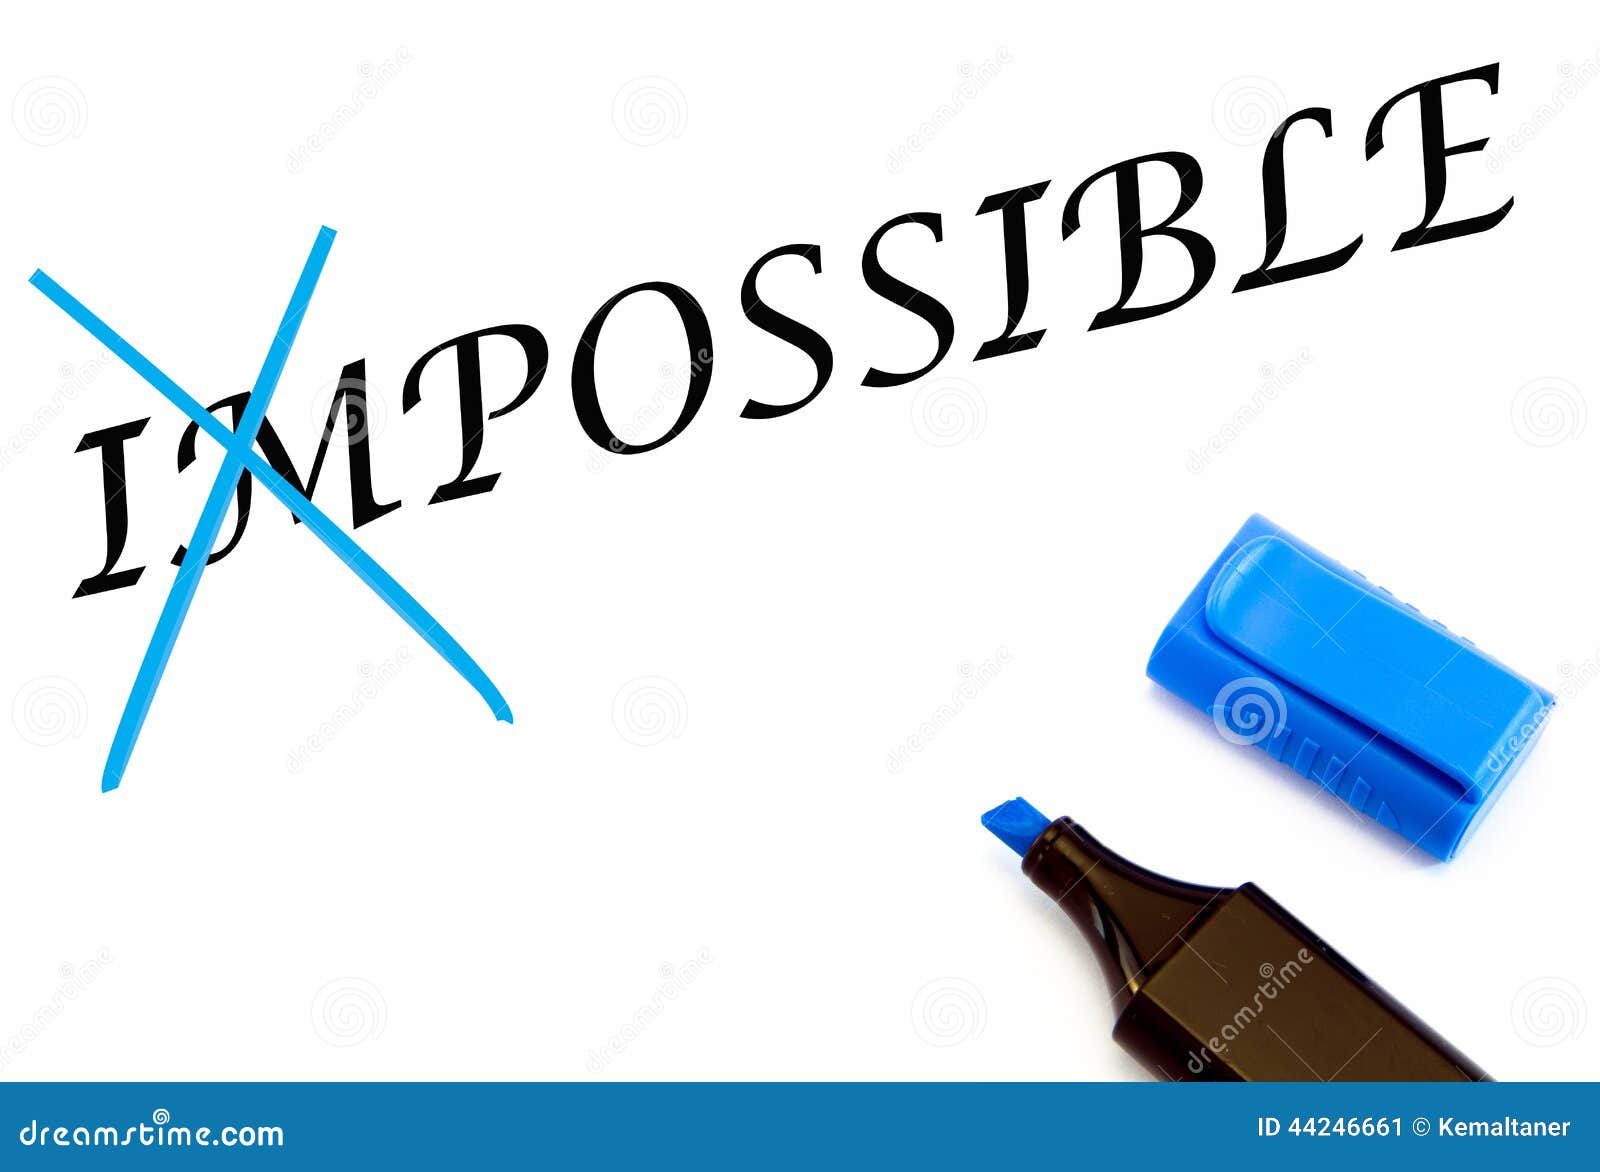 impossible changed to possible